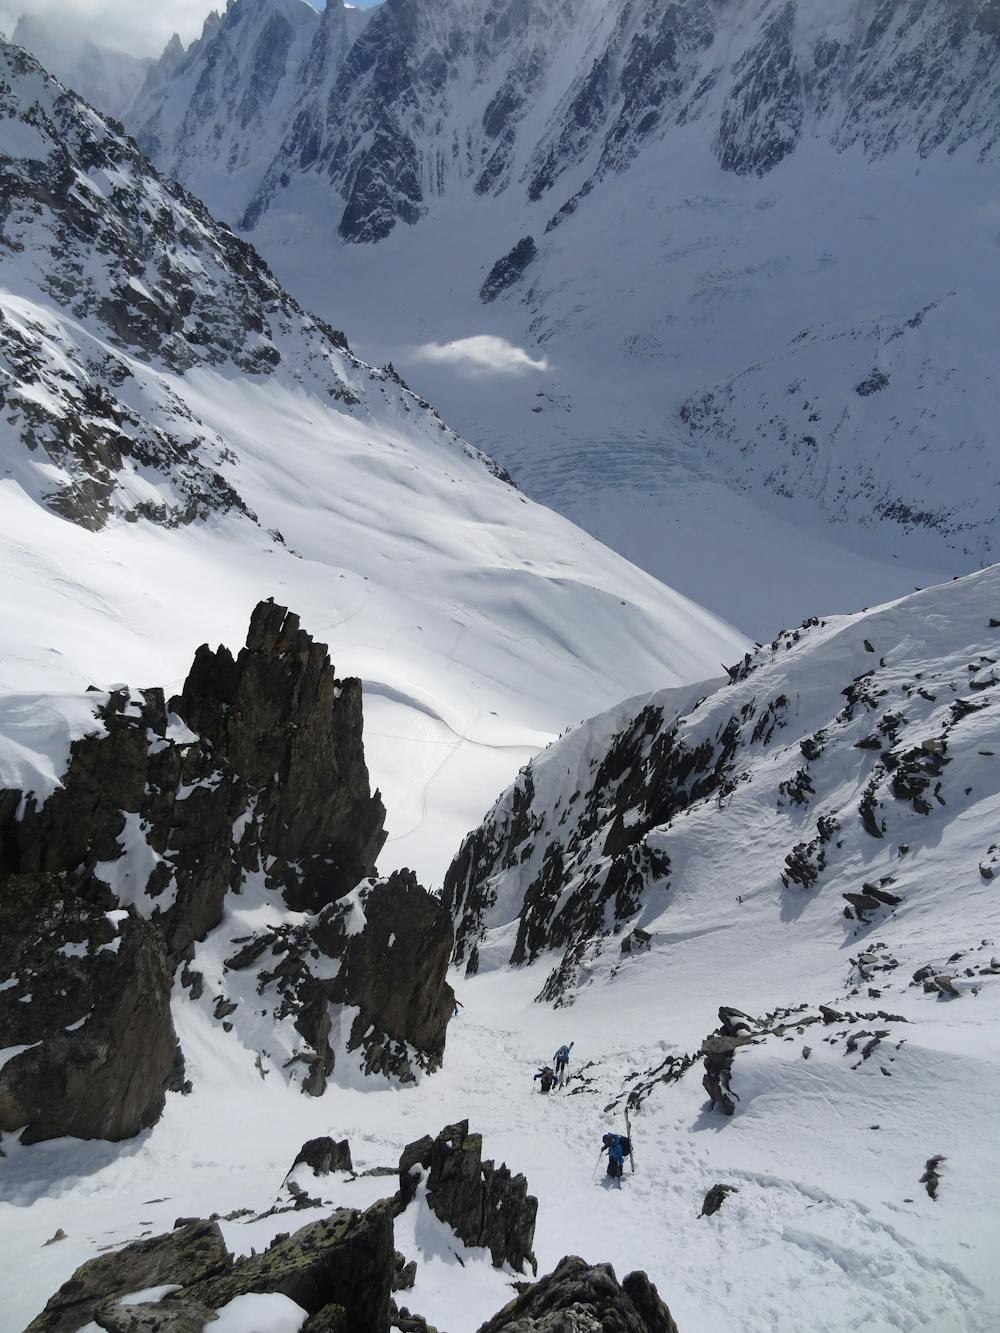 Booting up the couloir that leads to the Col.